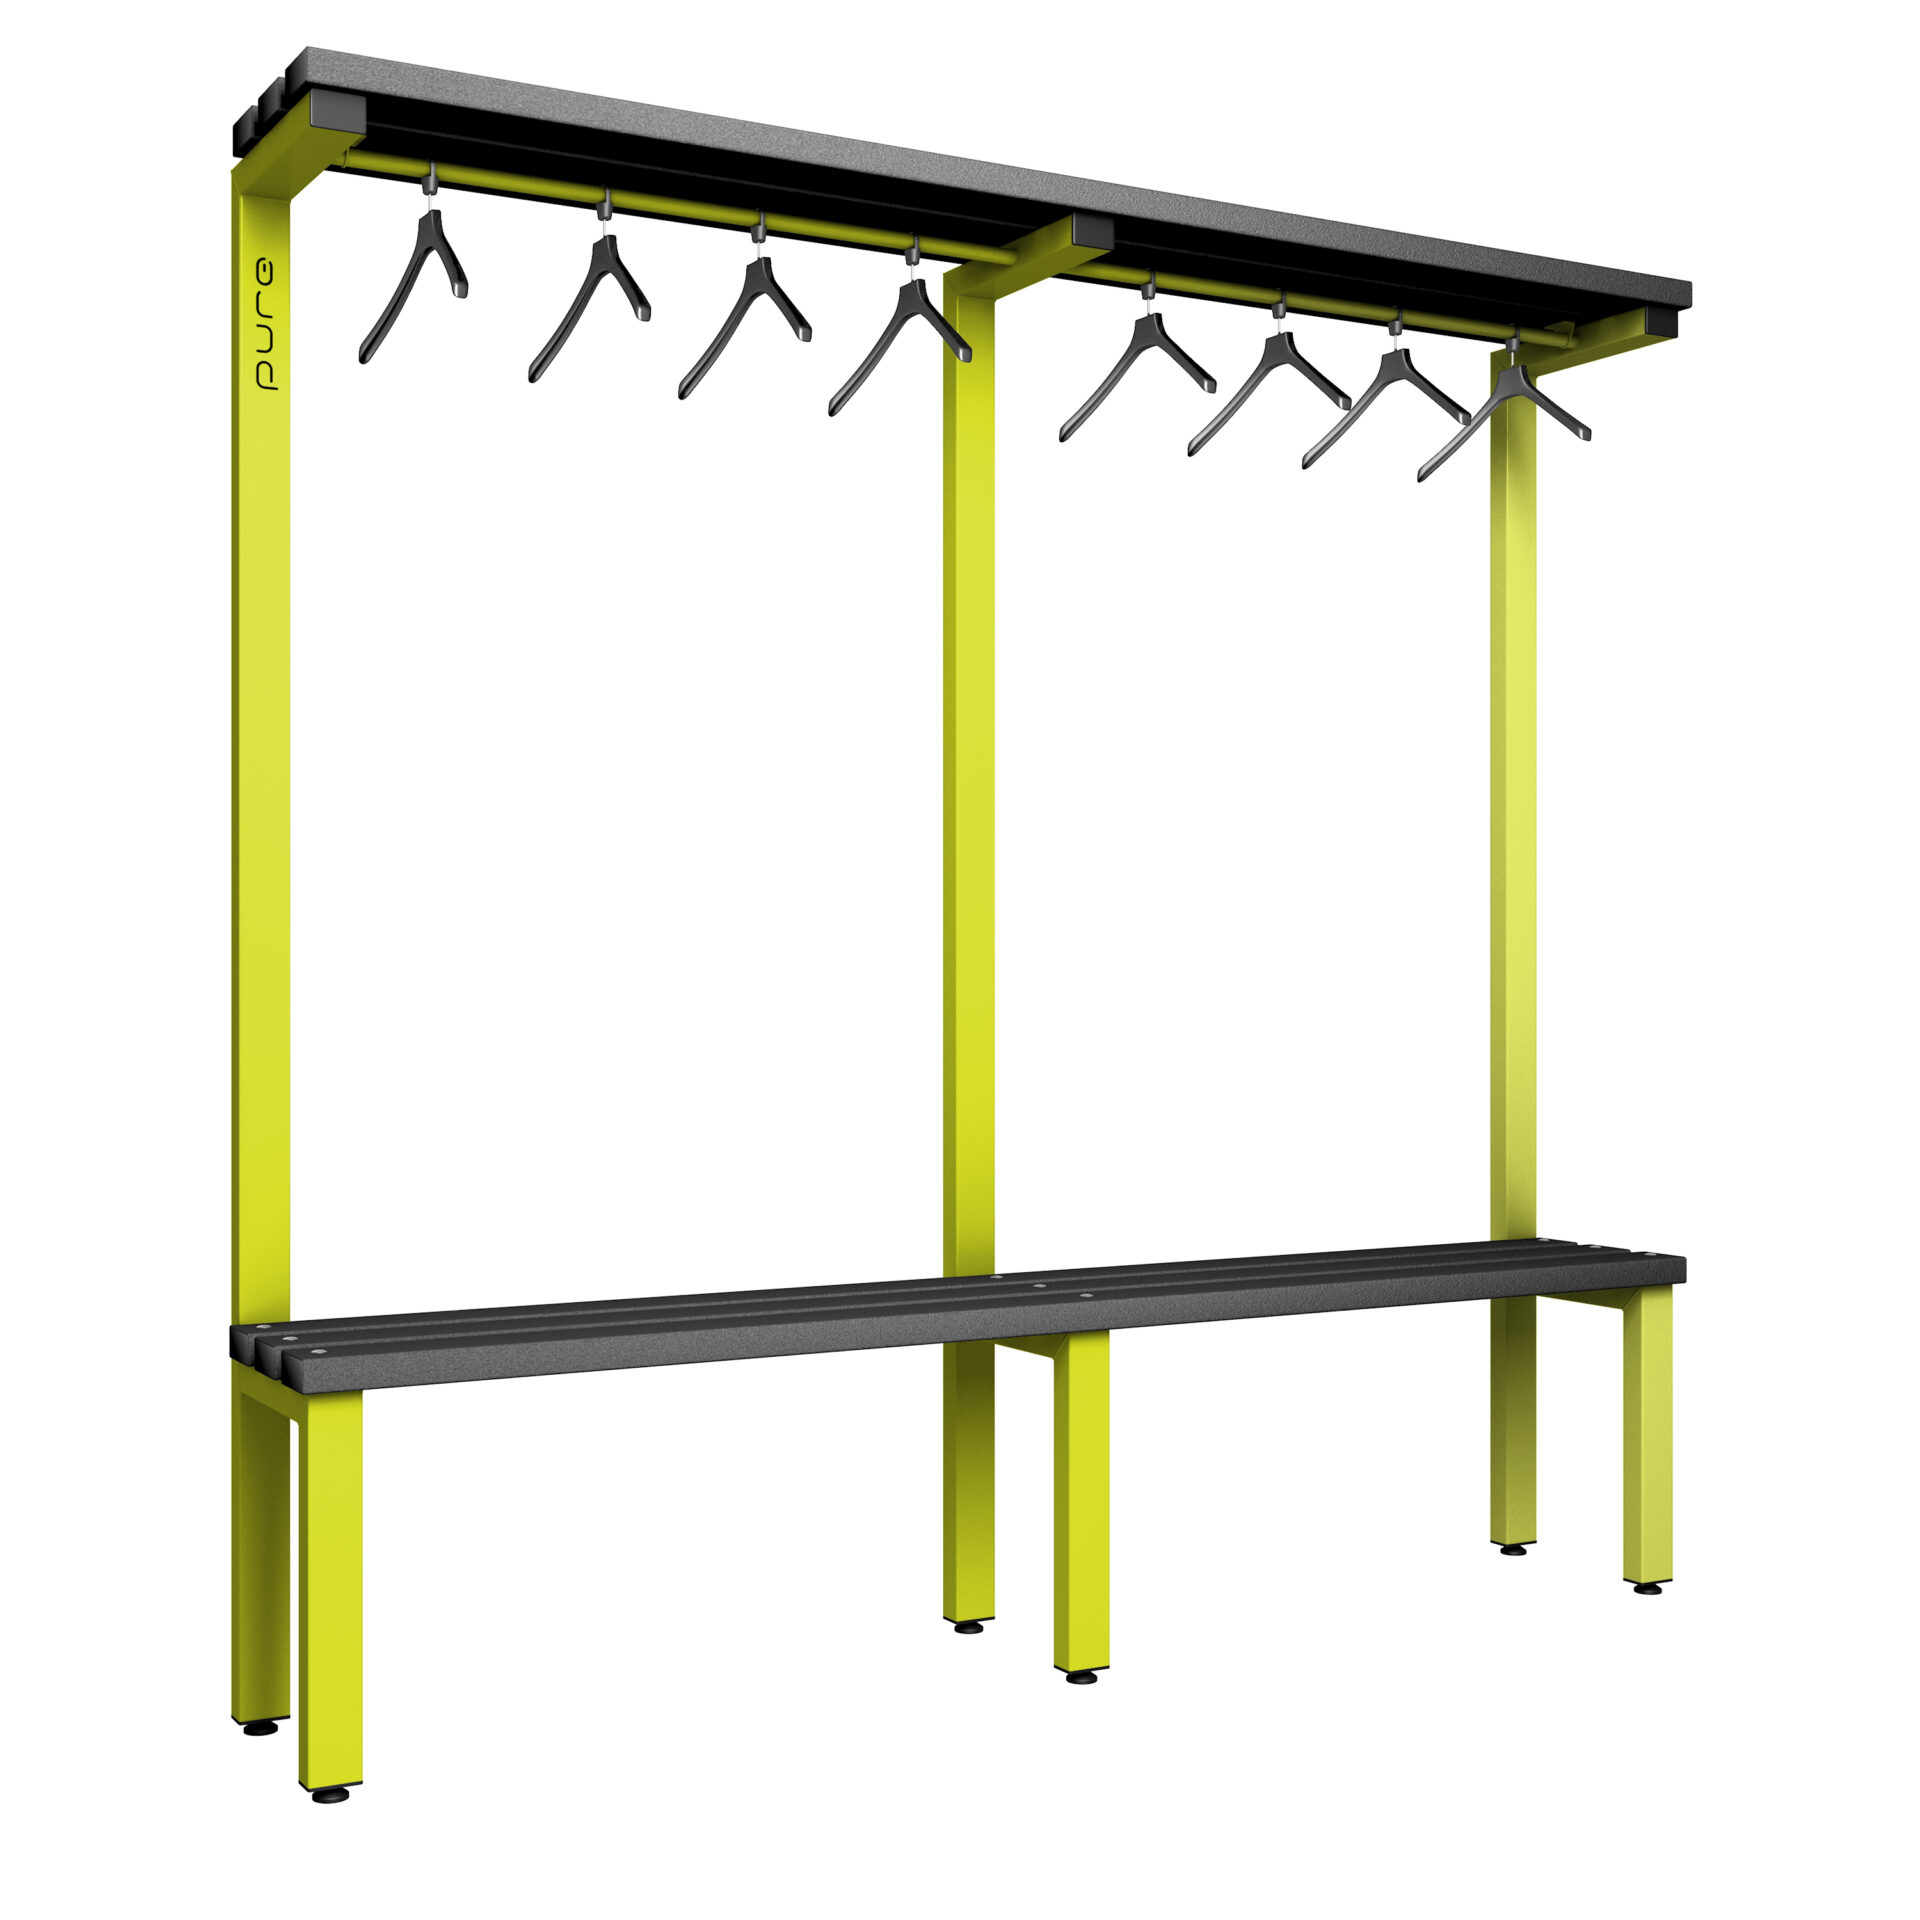 Pure Carbon Zero Single Sided 2000mm Overhead Hanging Bench